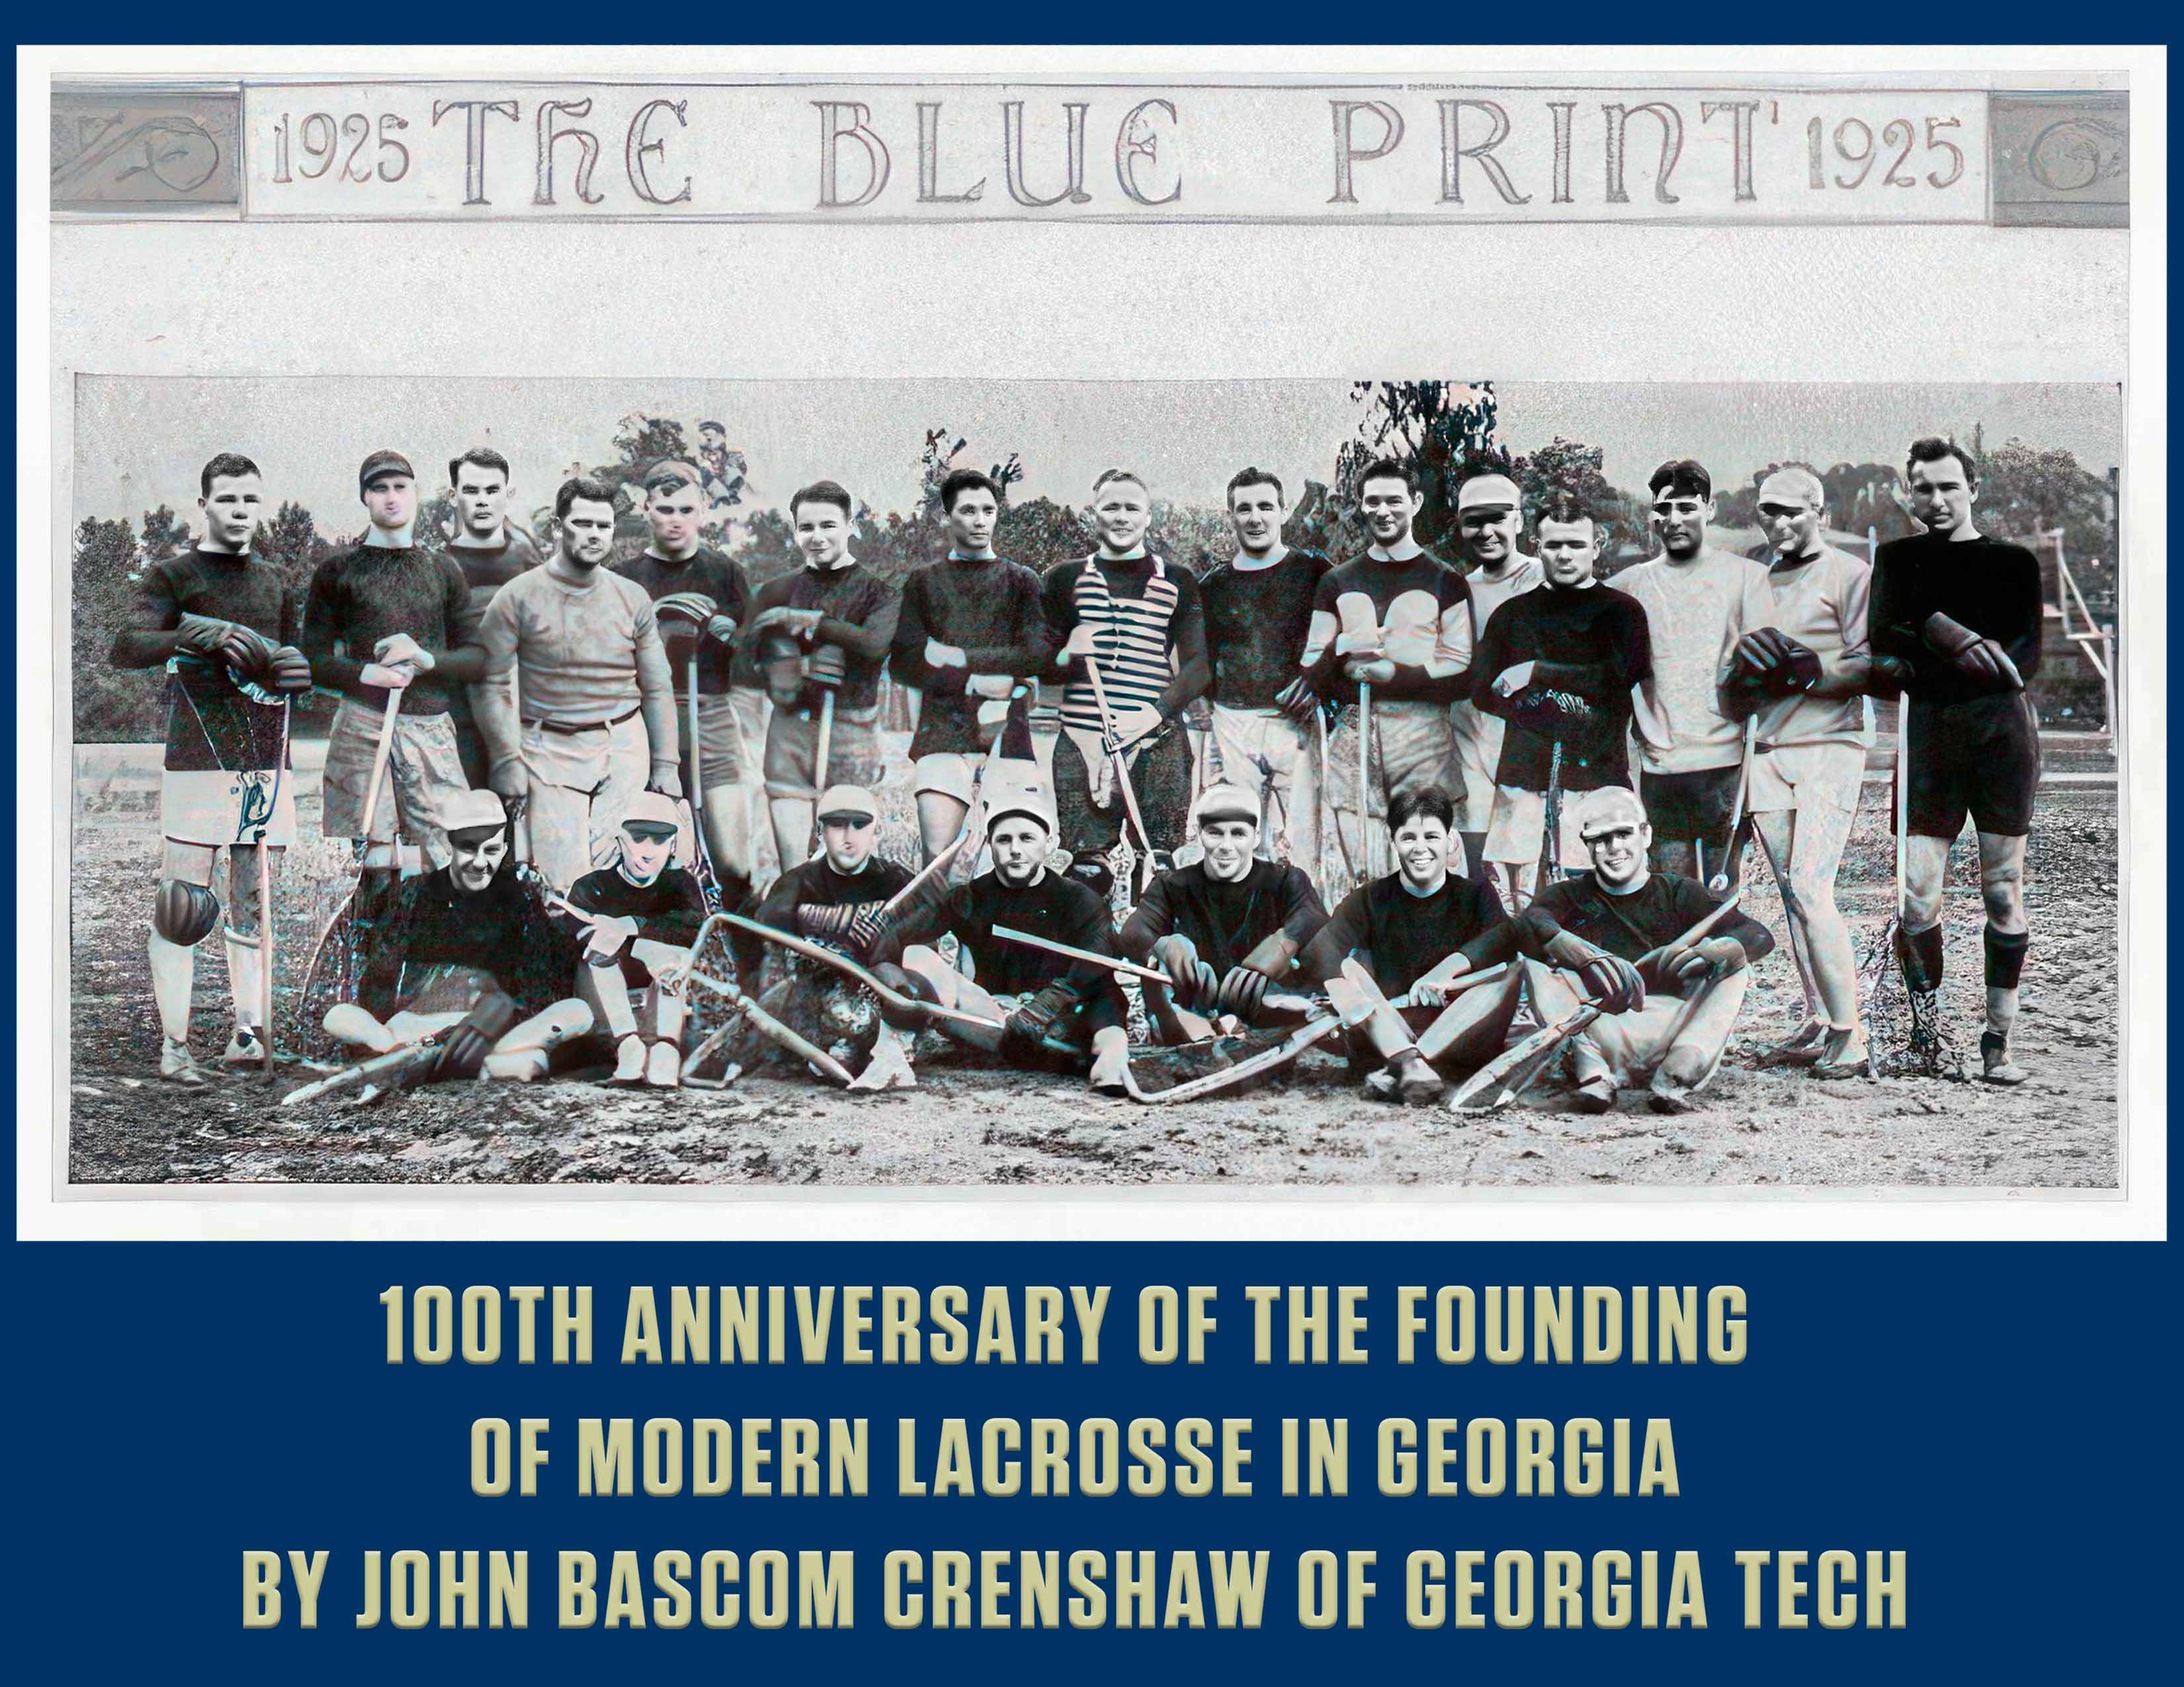 Men's Lacrosse to Honor Founding of Georgia Tech Lacrosse by Dr. JB Crenshaw over 100 Years Ago!